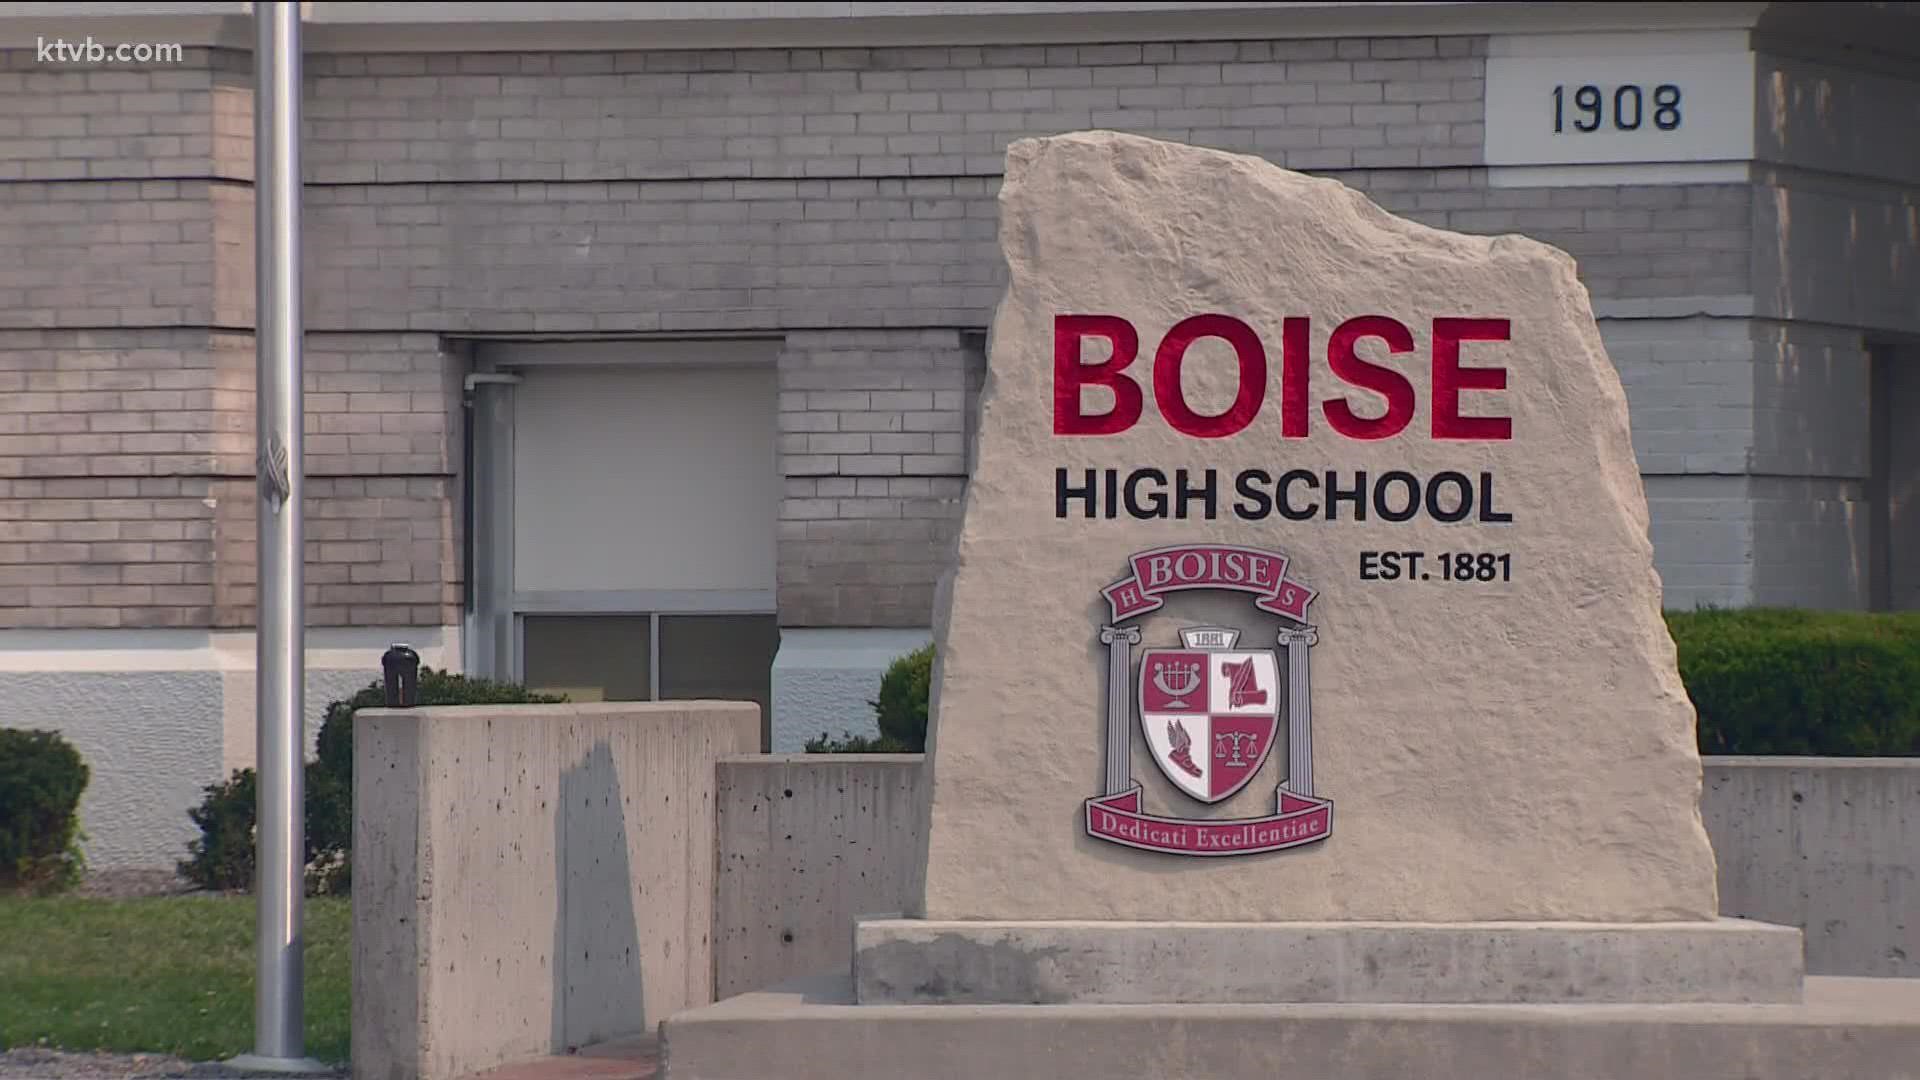 On May 5, Boise Police responded to a report of a student with a gun. Though BPD said there was no evidence of a threat, Boise High suspended the student.